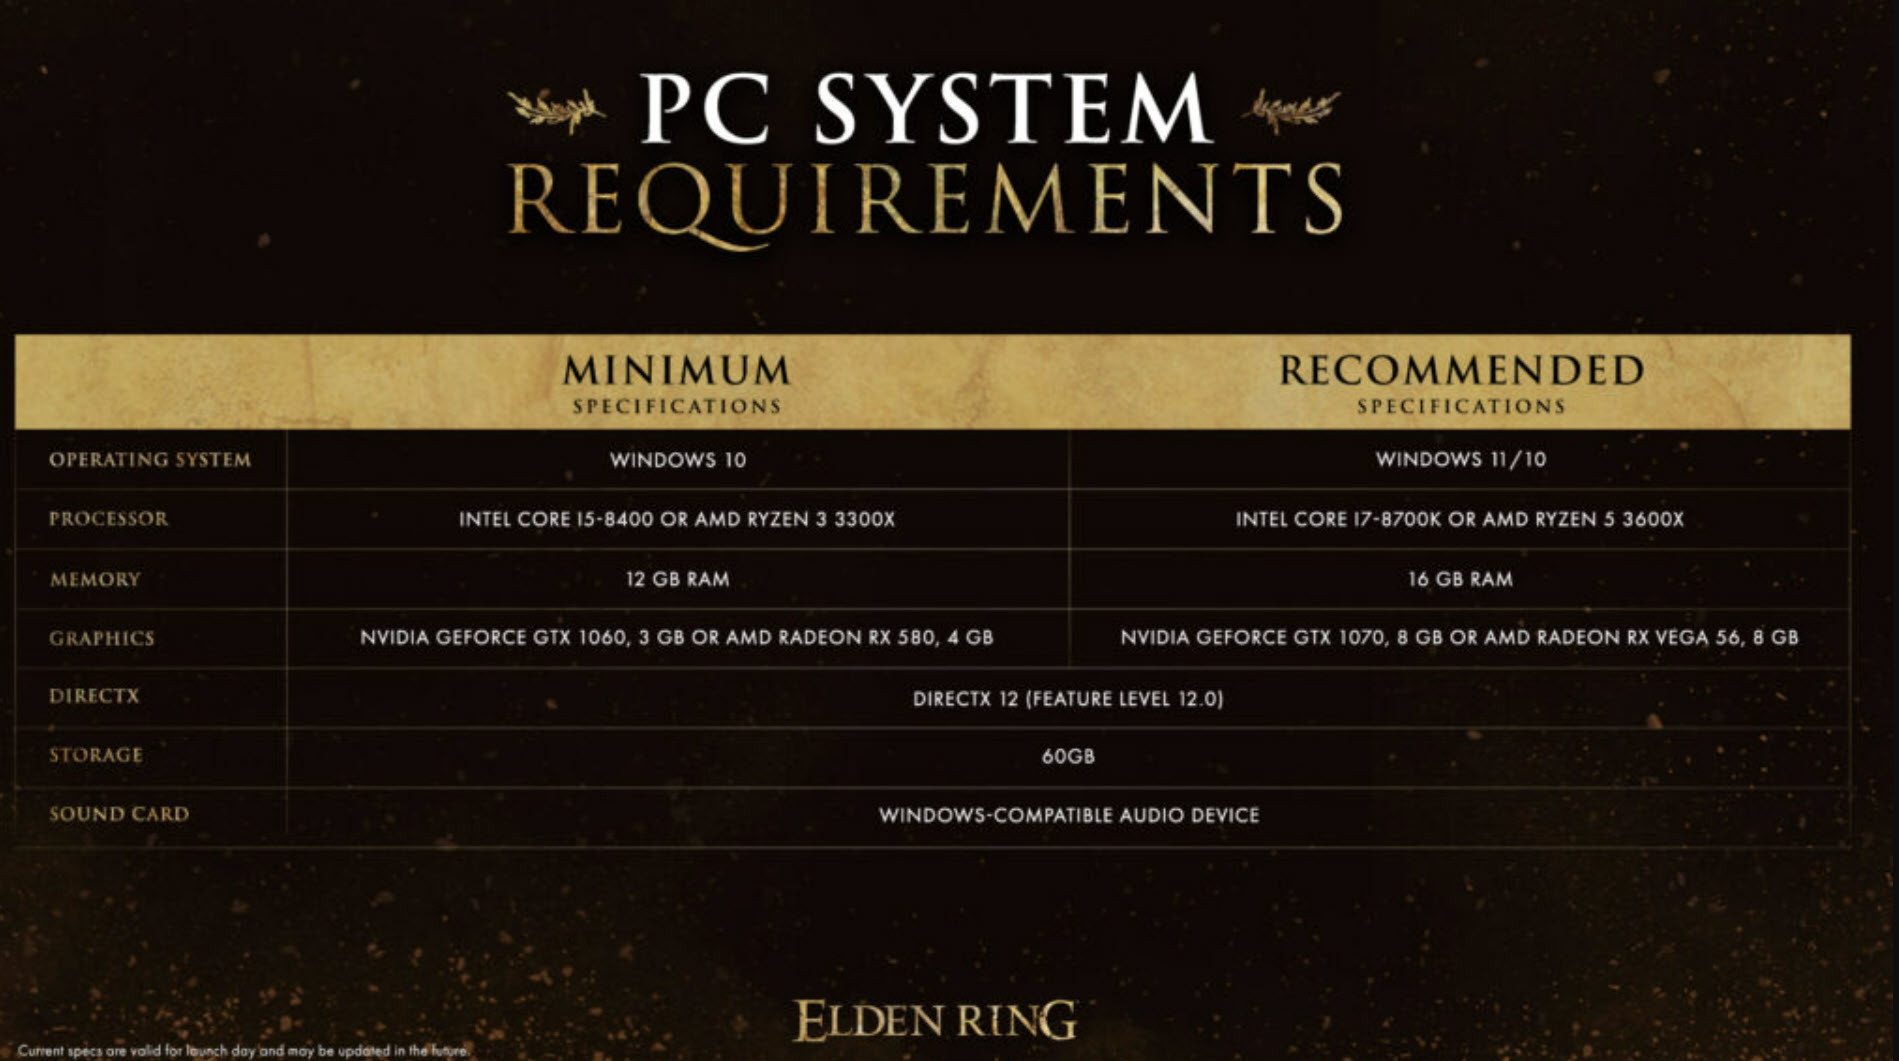 System Requirements For Elden Ring